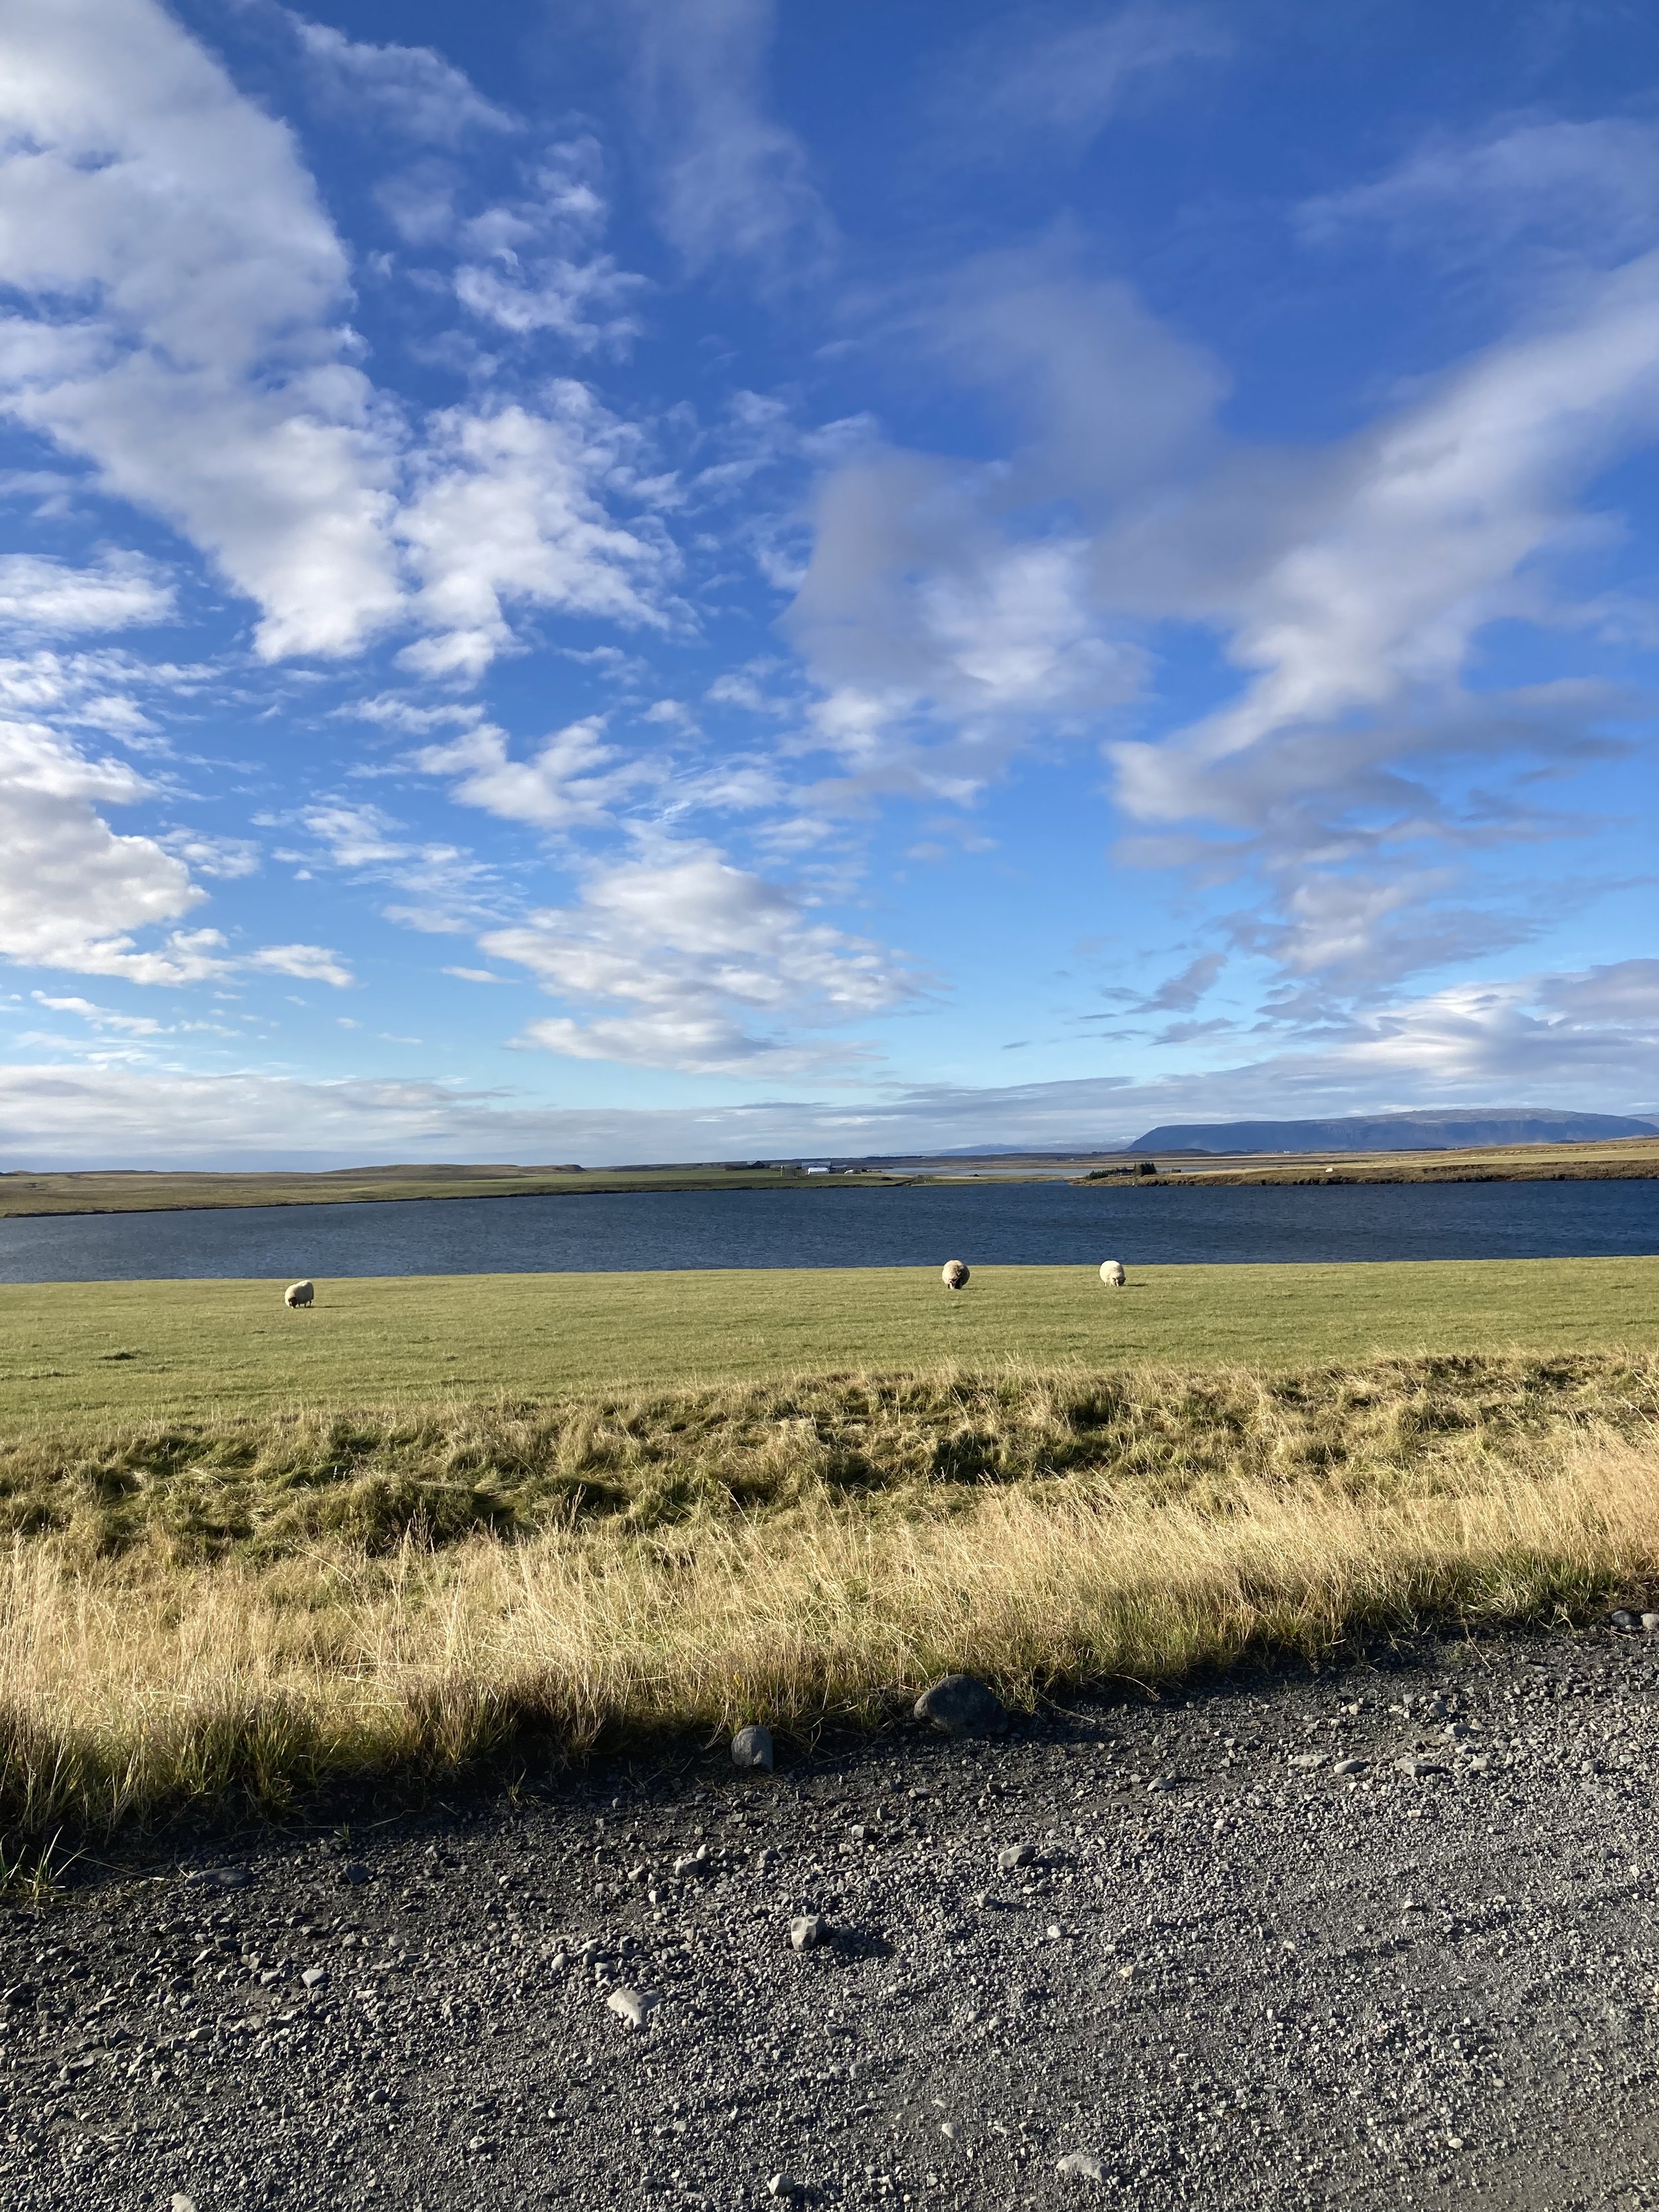 On the way to a friend's farm, west of Selfoss.